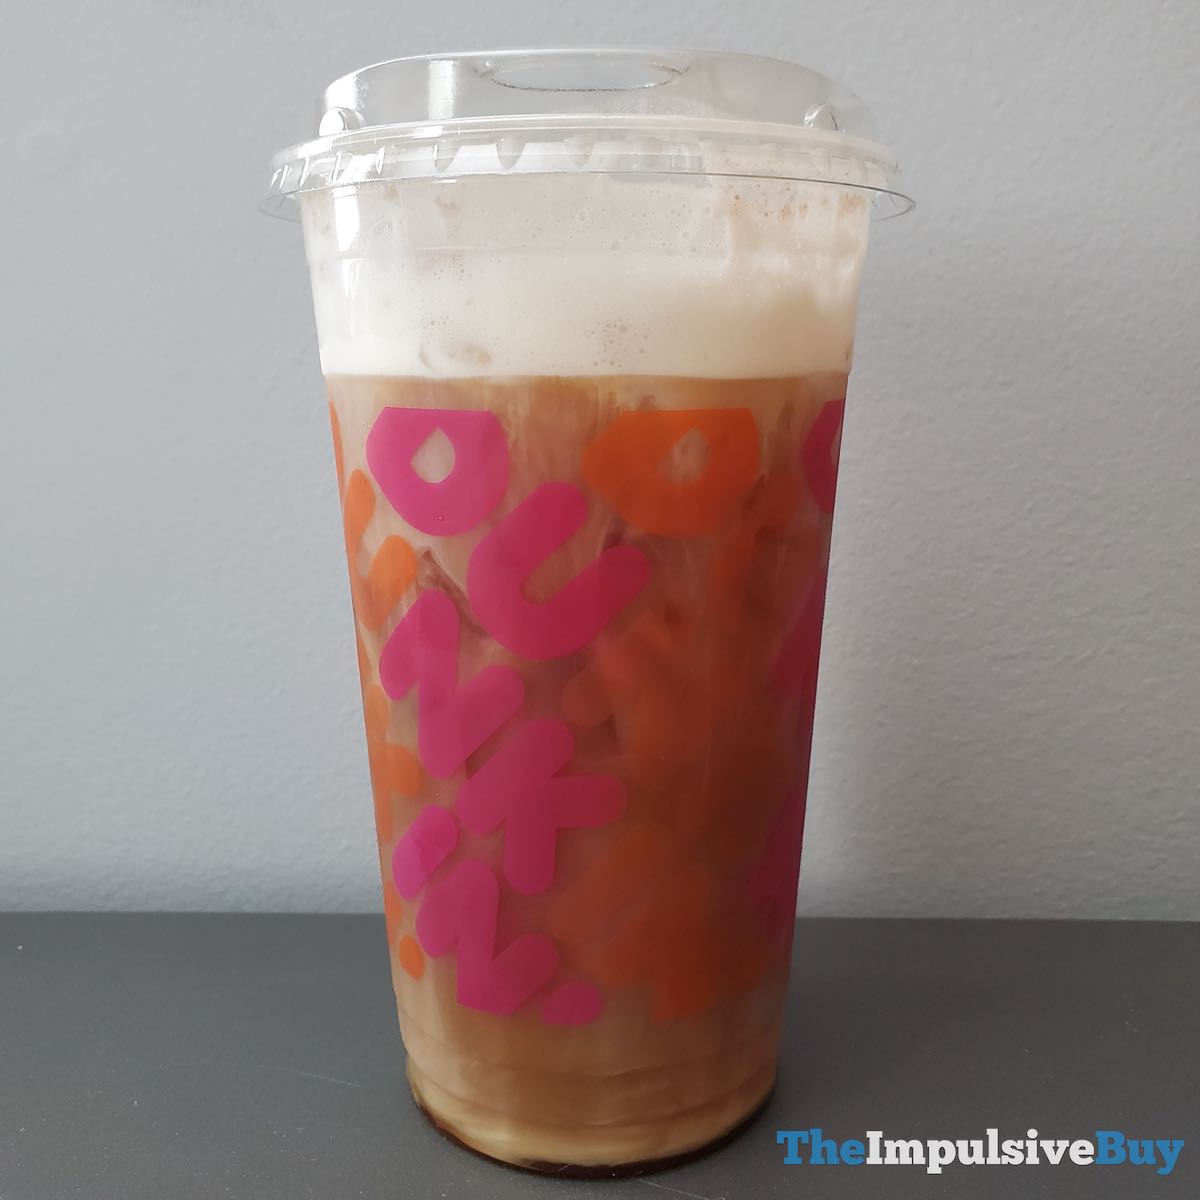 https://www.theimpulsivebuy.com/wordpress/wp-content/uploads/2021/03/Dunkin-Chocolate-Stout-Cold-Brew-with-Sweet-Cold-Foam-Full.jpeg